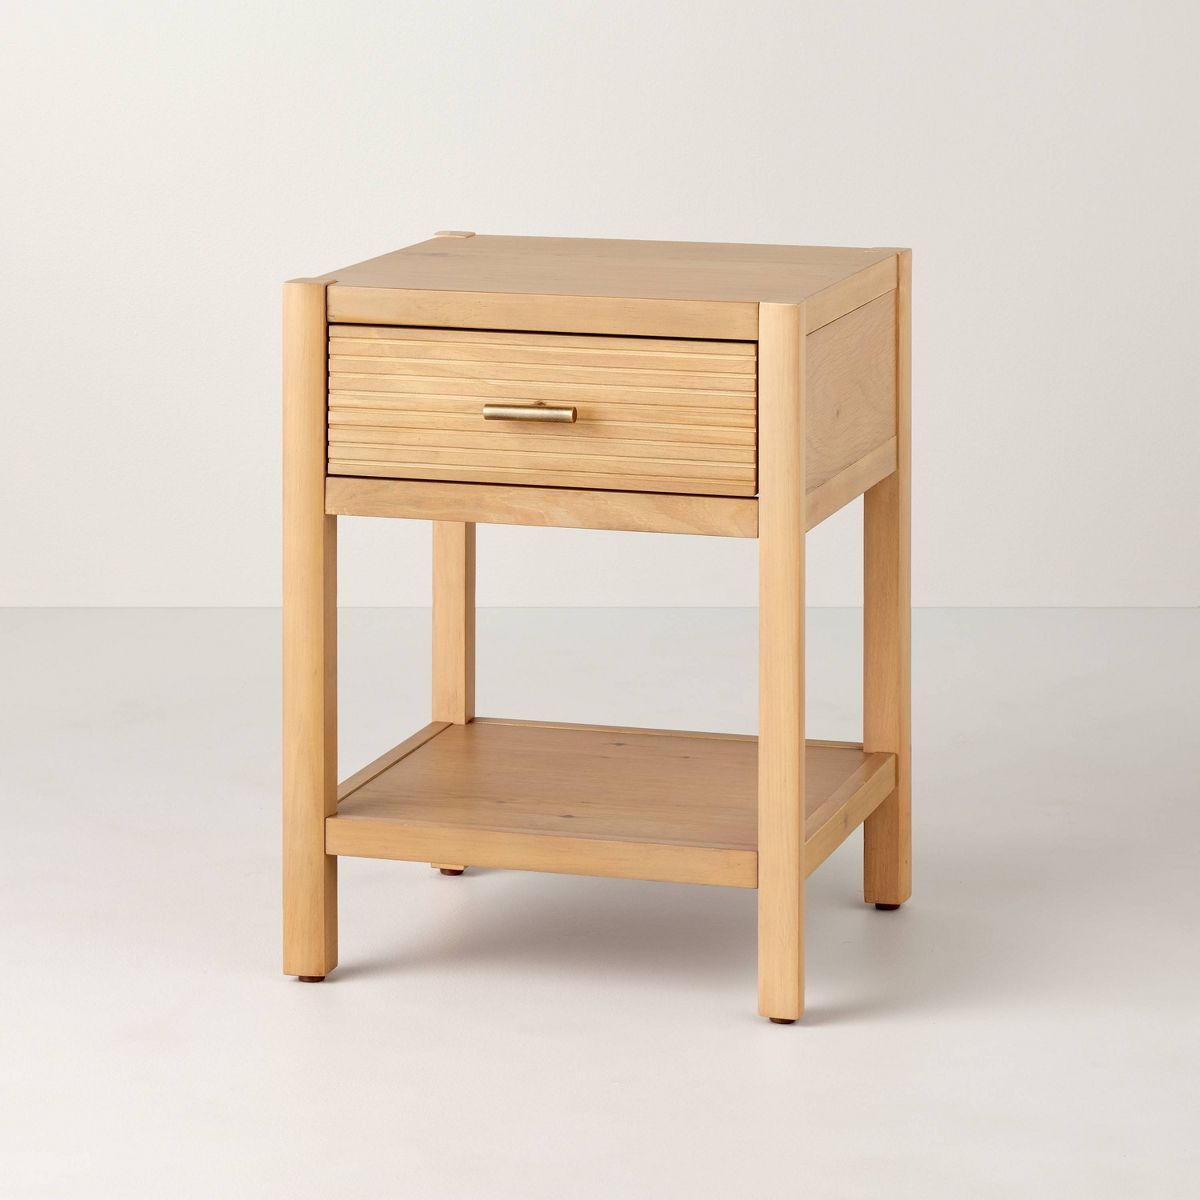 Grooved Wood Square Accent Table with Drawer - Natural - Hearth & Hand™ with Magnolia | Target